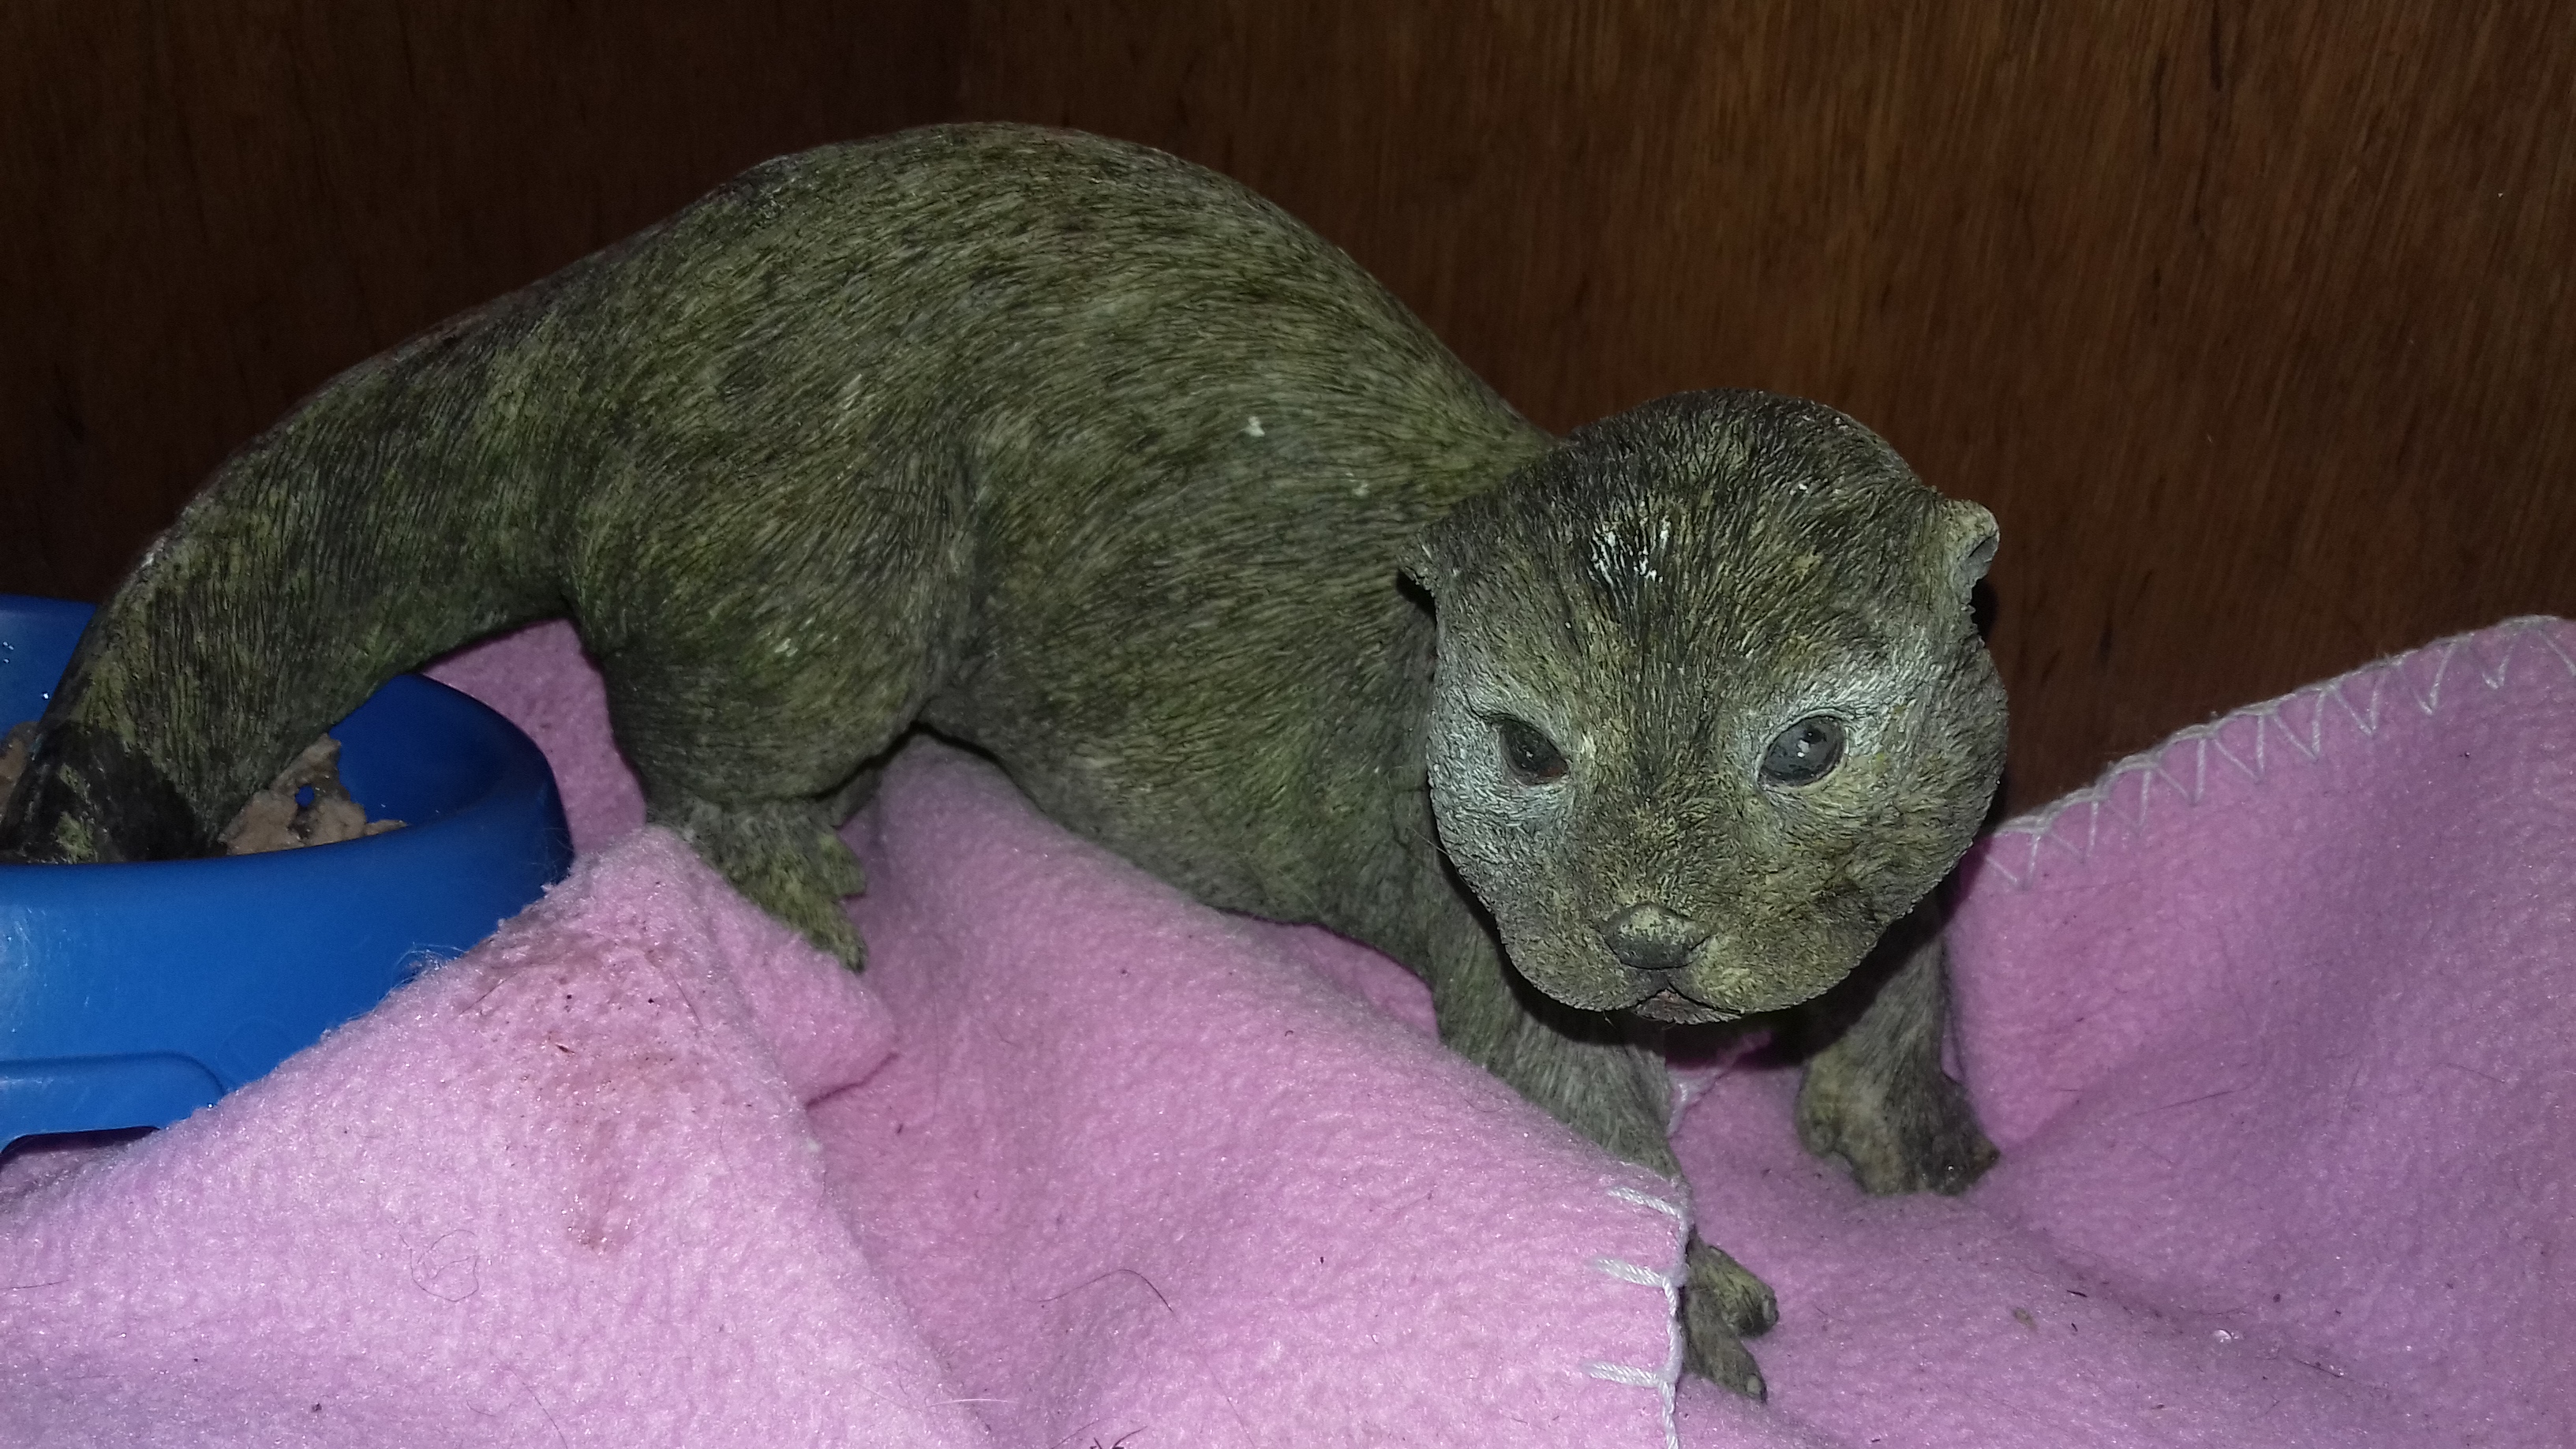 A woman in Aberdeen mistook the ornamental otter for a lizard after finding it in her cat's shelter (Scottish SPCA/PA)